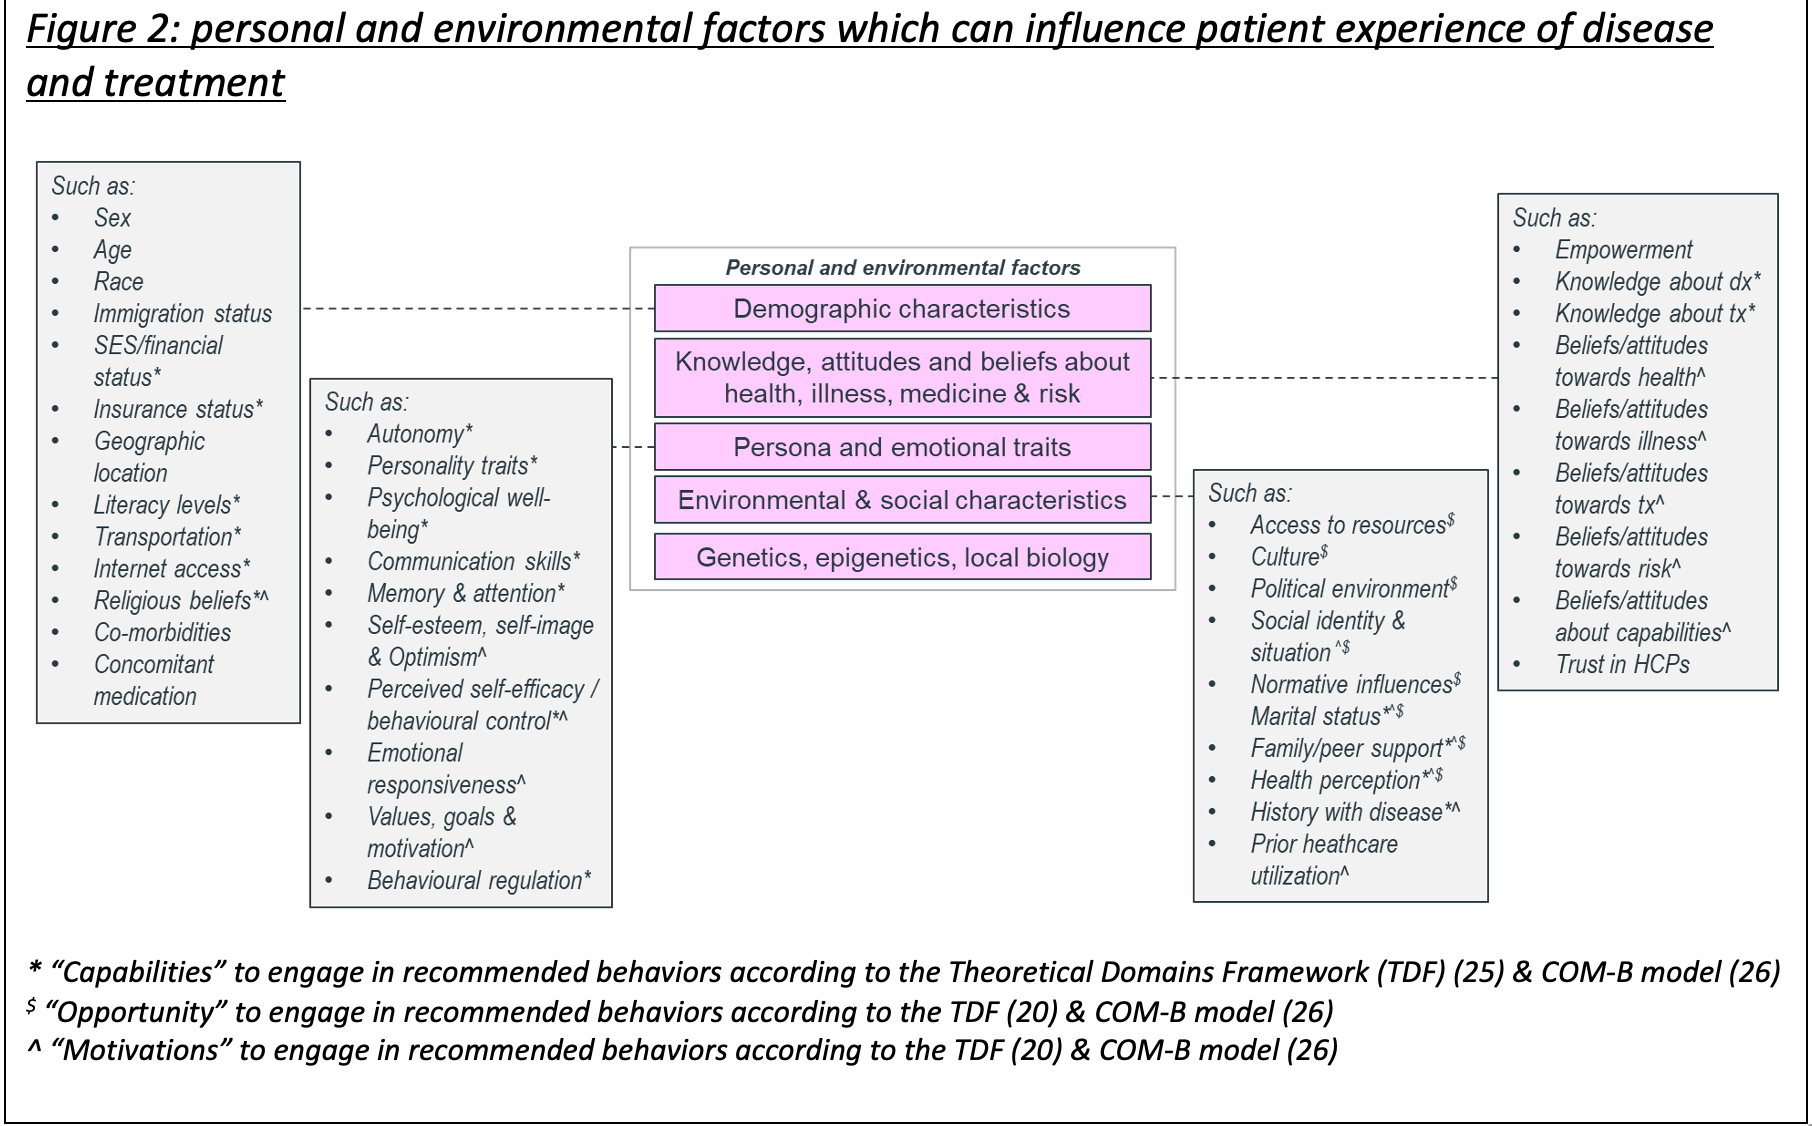 Figure 2: personal and environmental factors which can influence patient experience of disease and treatment